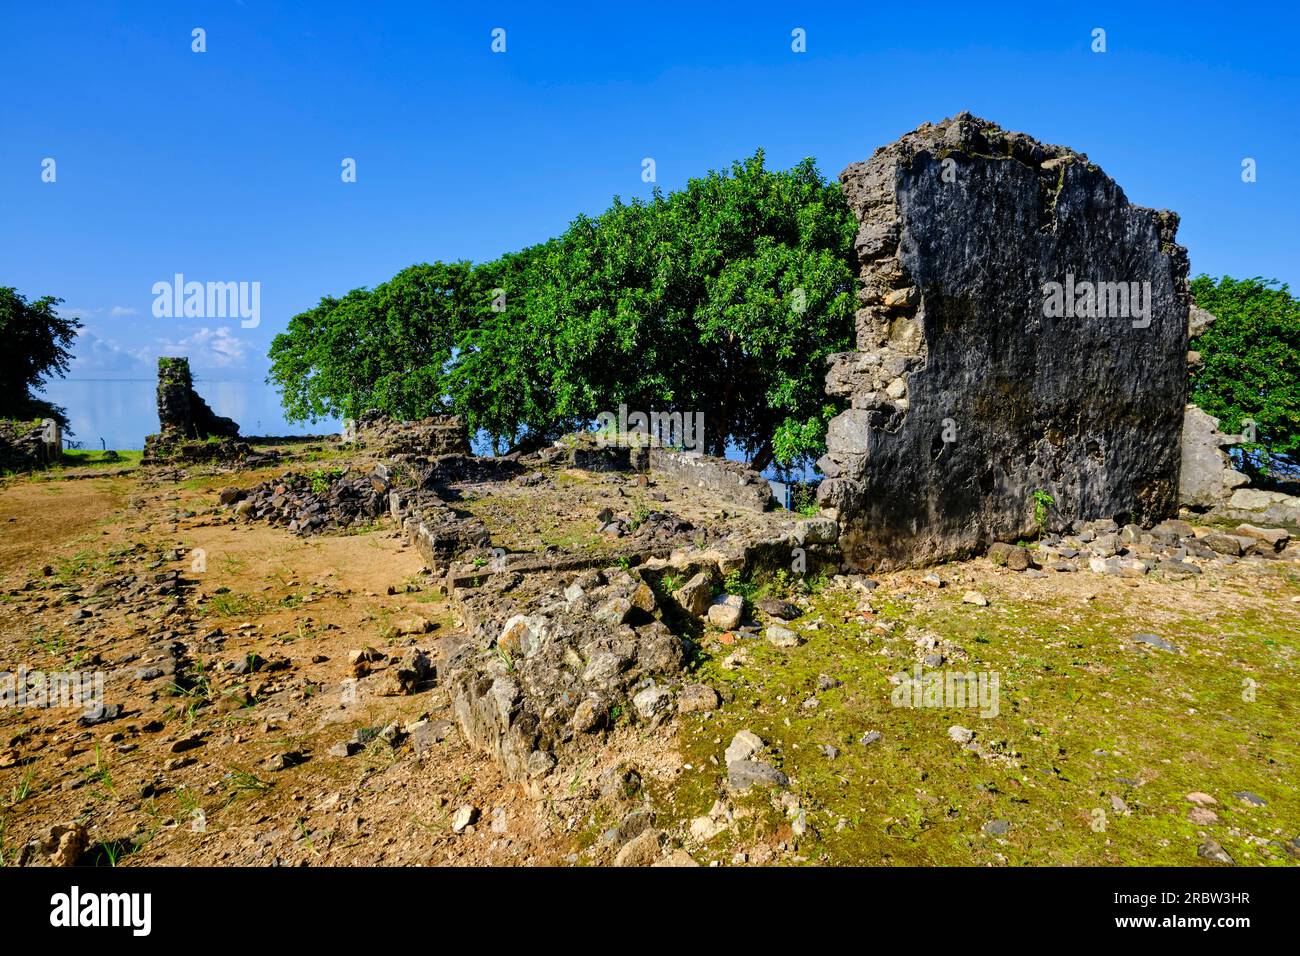 Mauritius, Grand Port district, Vieux Grand Port, ruins of Fort Frederik Hendrik built by the Dutch in 1638 Stock Photo